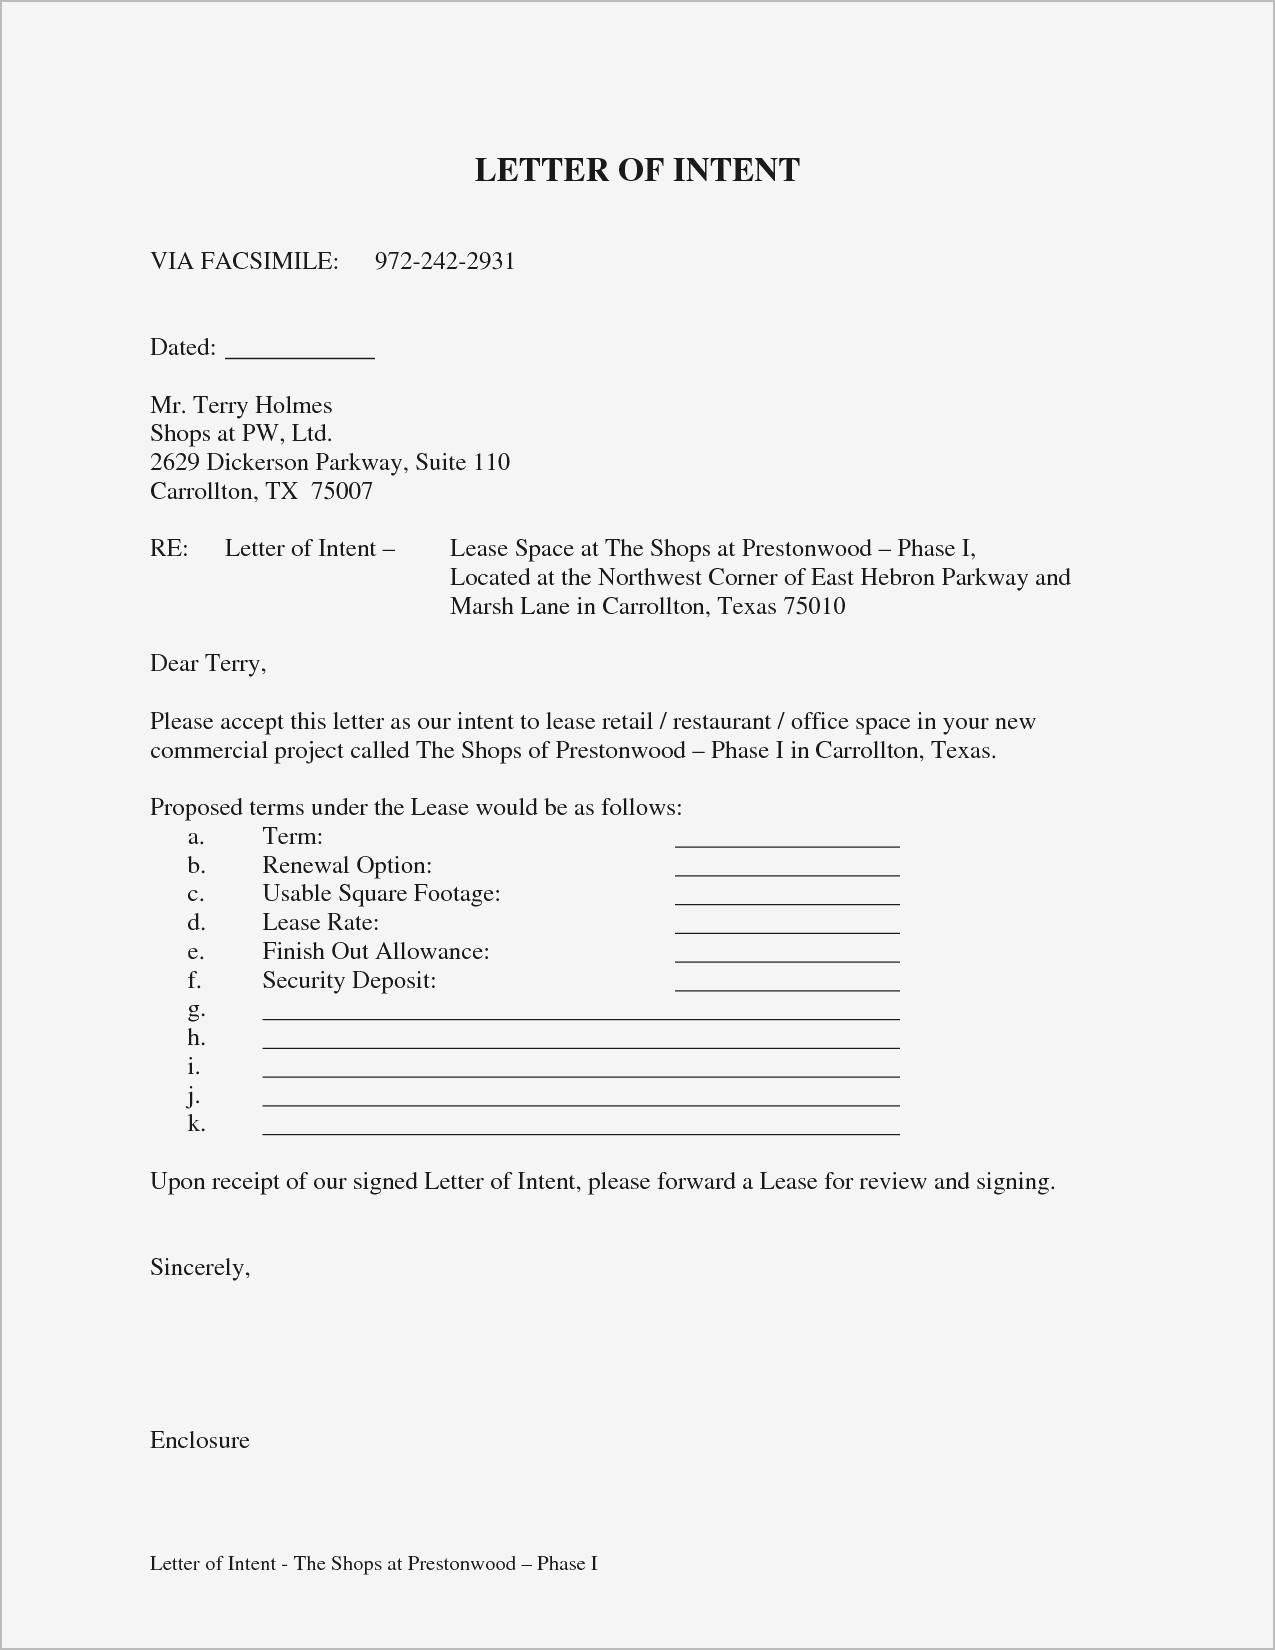 Intent to Lease Letter Template - Letter Intent to Lease Ideas